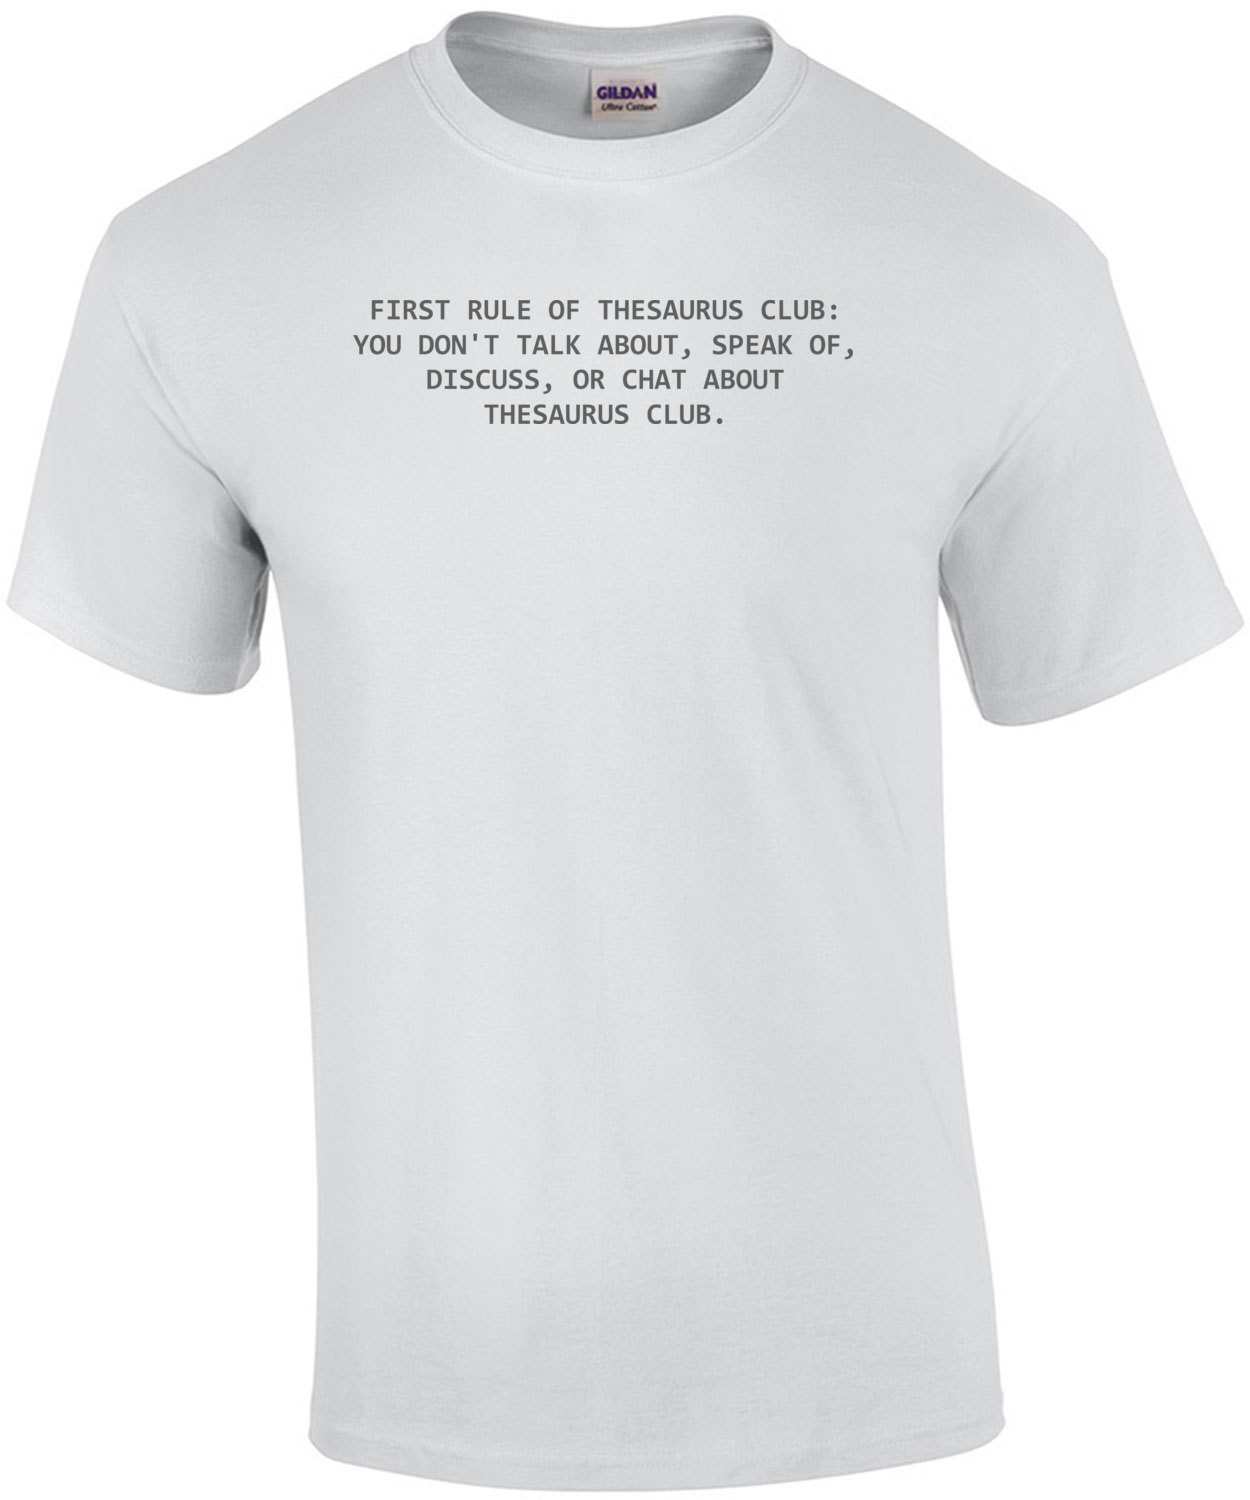 FIRST RULE OF THESAURUS CLUB - YOU DON'T TALK ABOUT, MENTION, SPEAK OF, DISCUSS OR CHAT ABOUT THESAURUS CLUB. Shirt